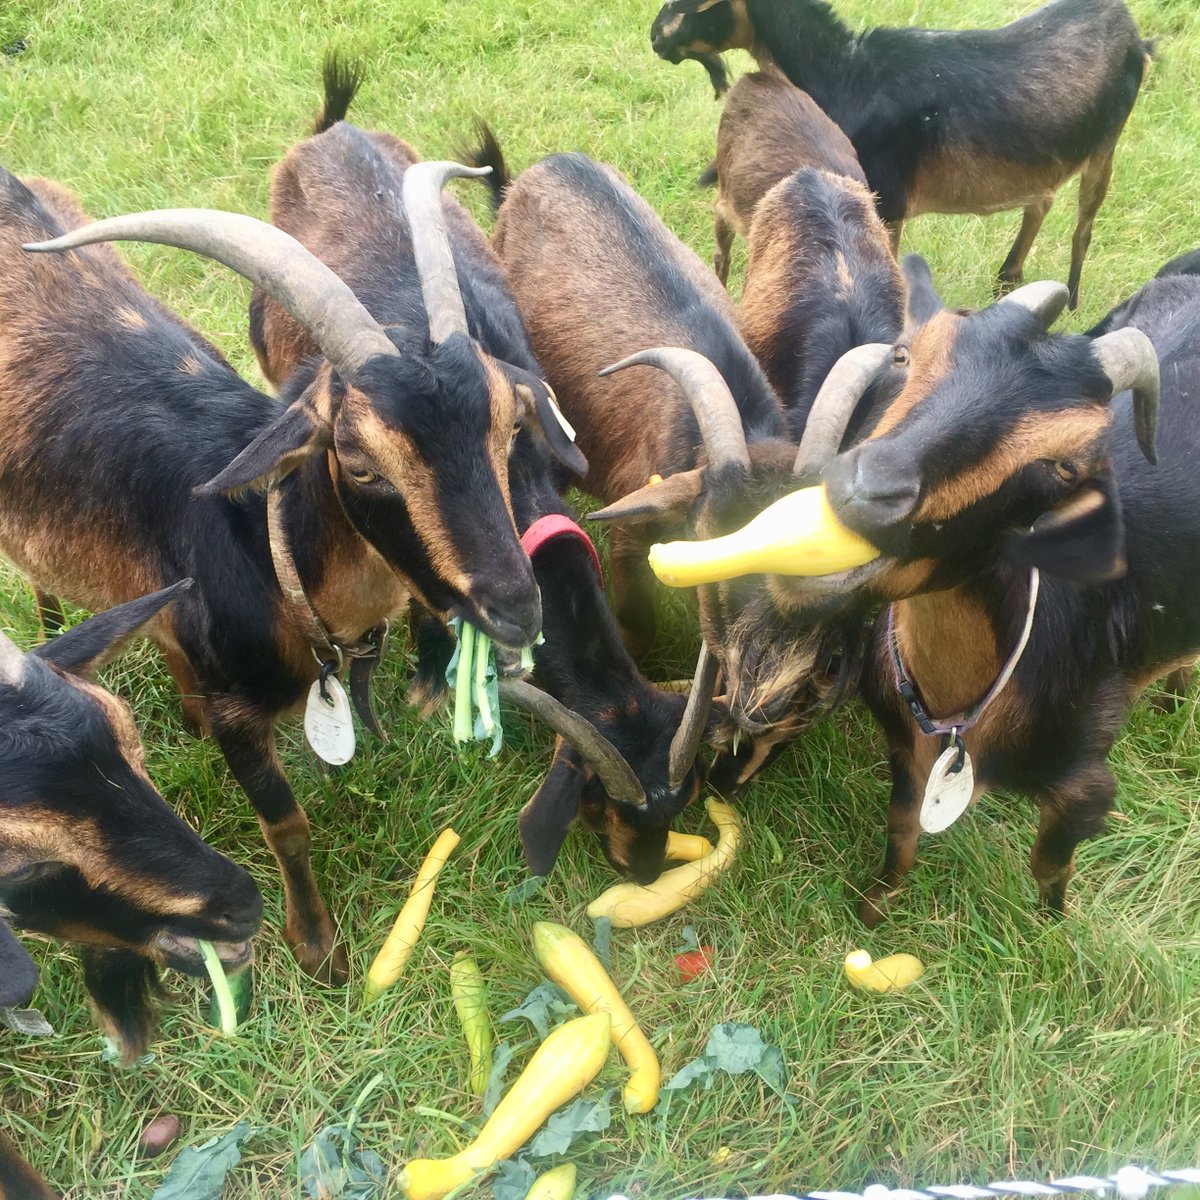 As I feel just a bit like a deer in the headlights with all the unknowns, I look to the past to smile at and look toward the future with hope. Enjoy a wonderful SCI goat picture from last summer! #sanclementeislandgoats #ebranchllc #goats
#wisconsinfarm #livestockconservancy